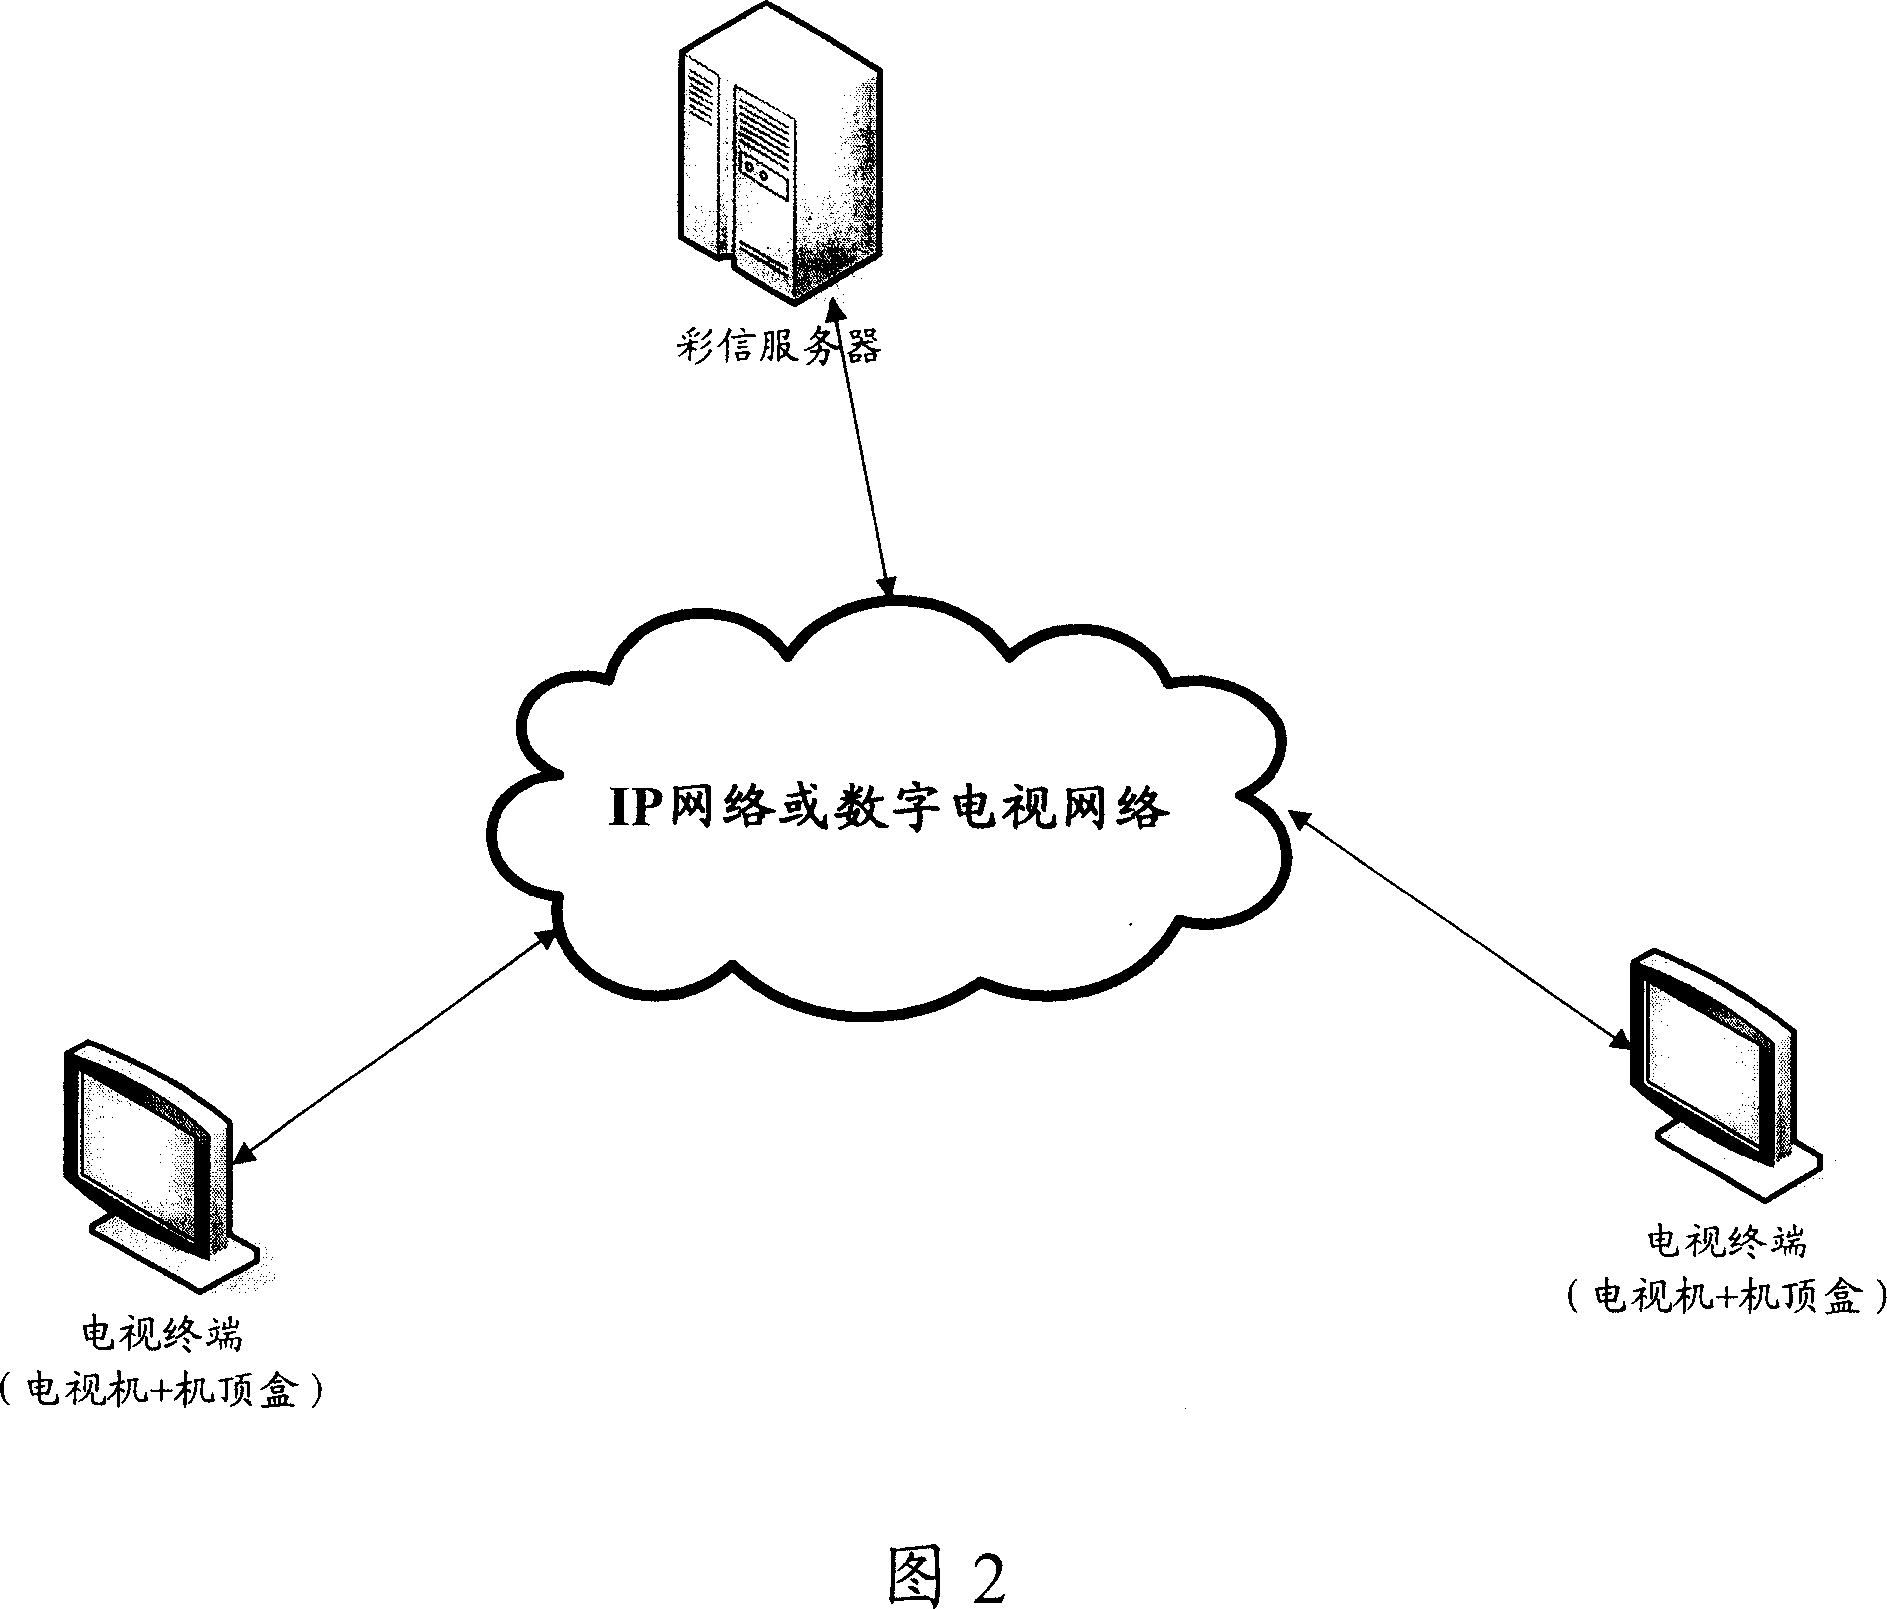 System for realizing multimeda messaging service (MMS) based on television terminal